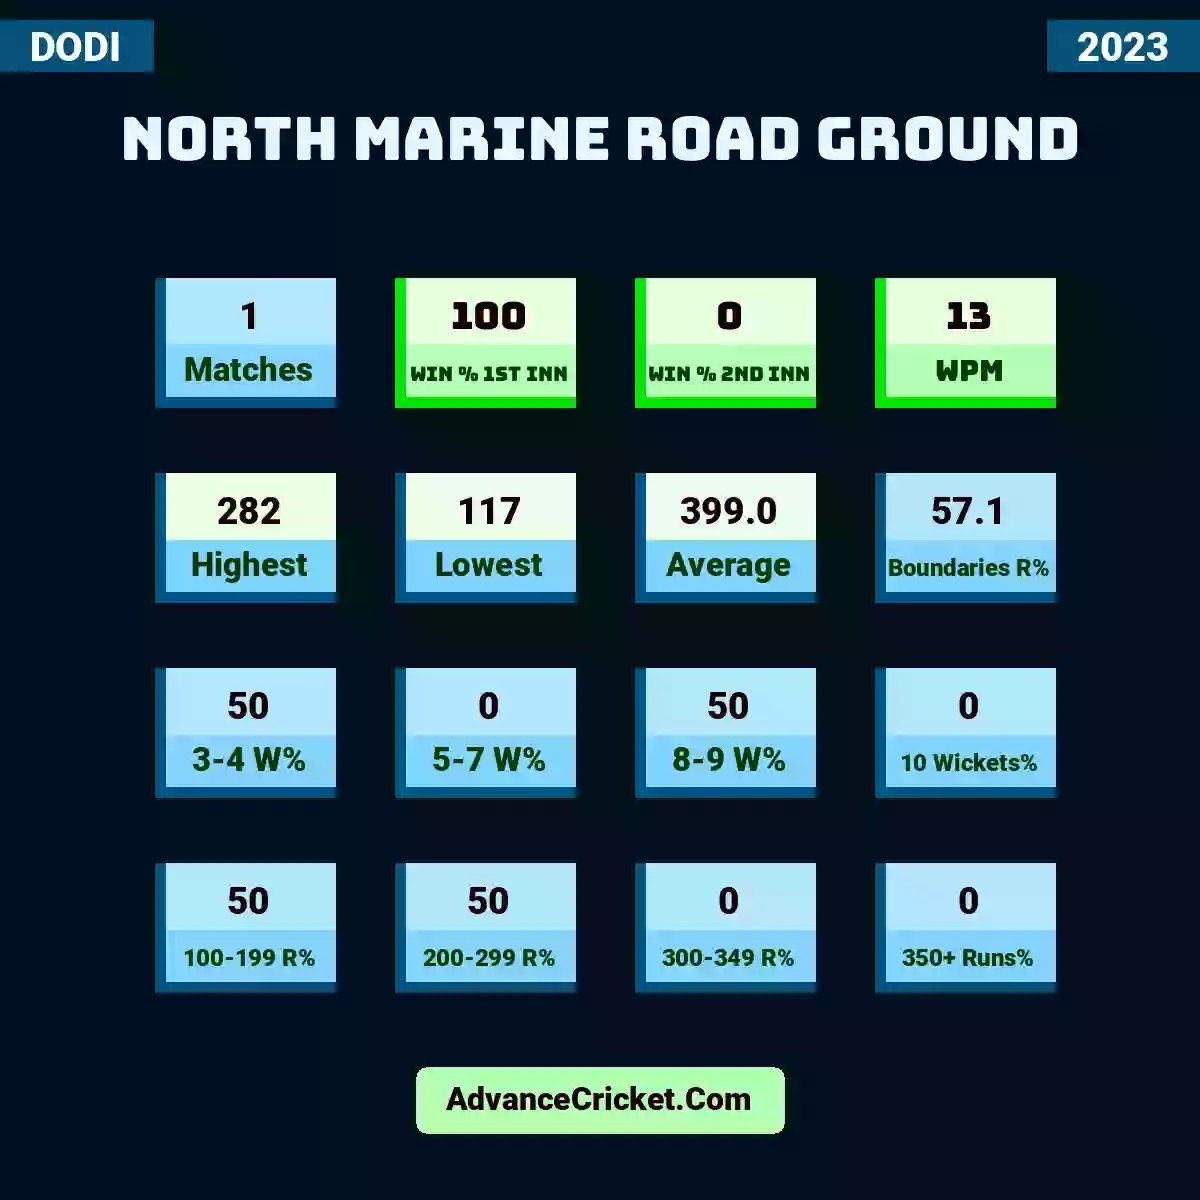 Image showing North Marine Road Ground with Matches: 1, Win % 1st Inn: 100, Win % 2nd Inn: 0, WPM: 13, Highest: 282, Lowest: 117, Average: 399.0, Boundaries R%: 57.1, 3-4 W%: 50, 5-7 W%: 0, 8-9 W%: 50, 10 Wickets%: 0, 100-199 R%: 50, 200-299 R%: 50, 300-349 R%: 0, 350+ Runs%: 0.